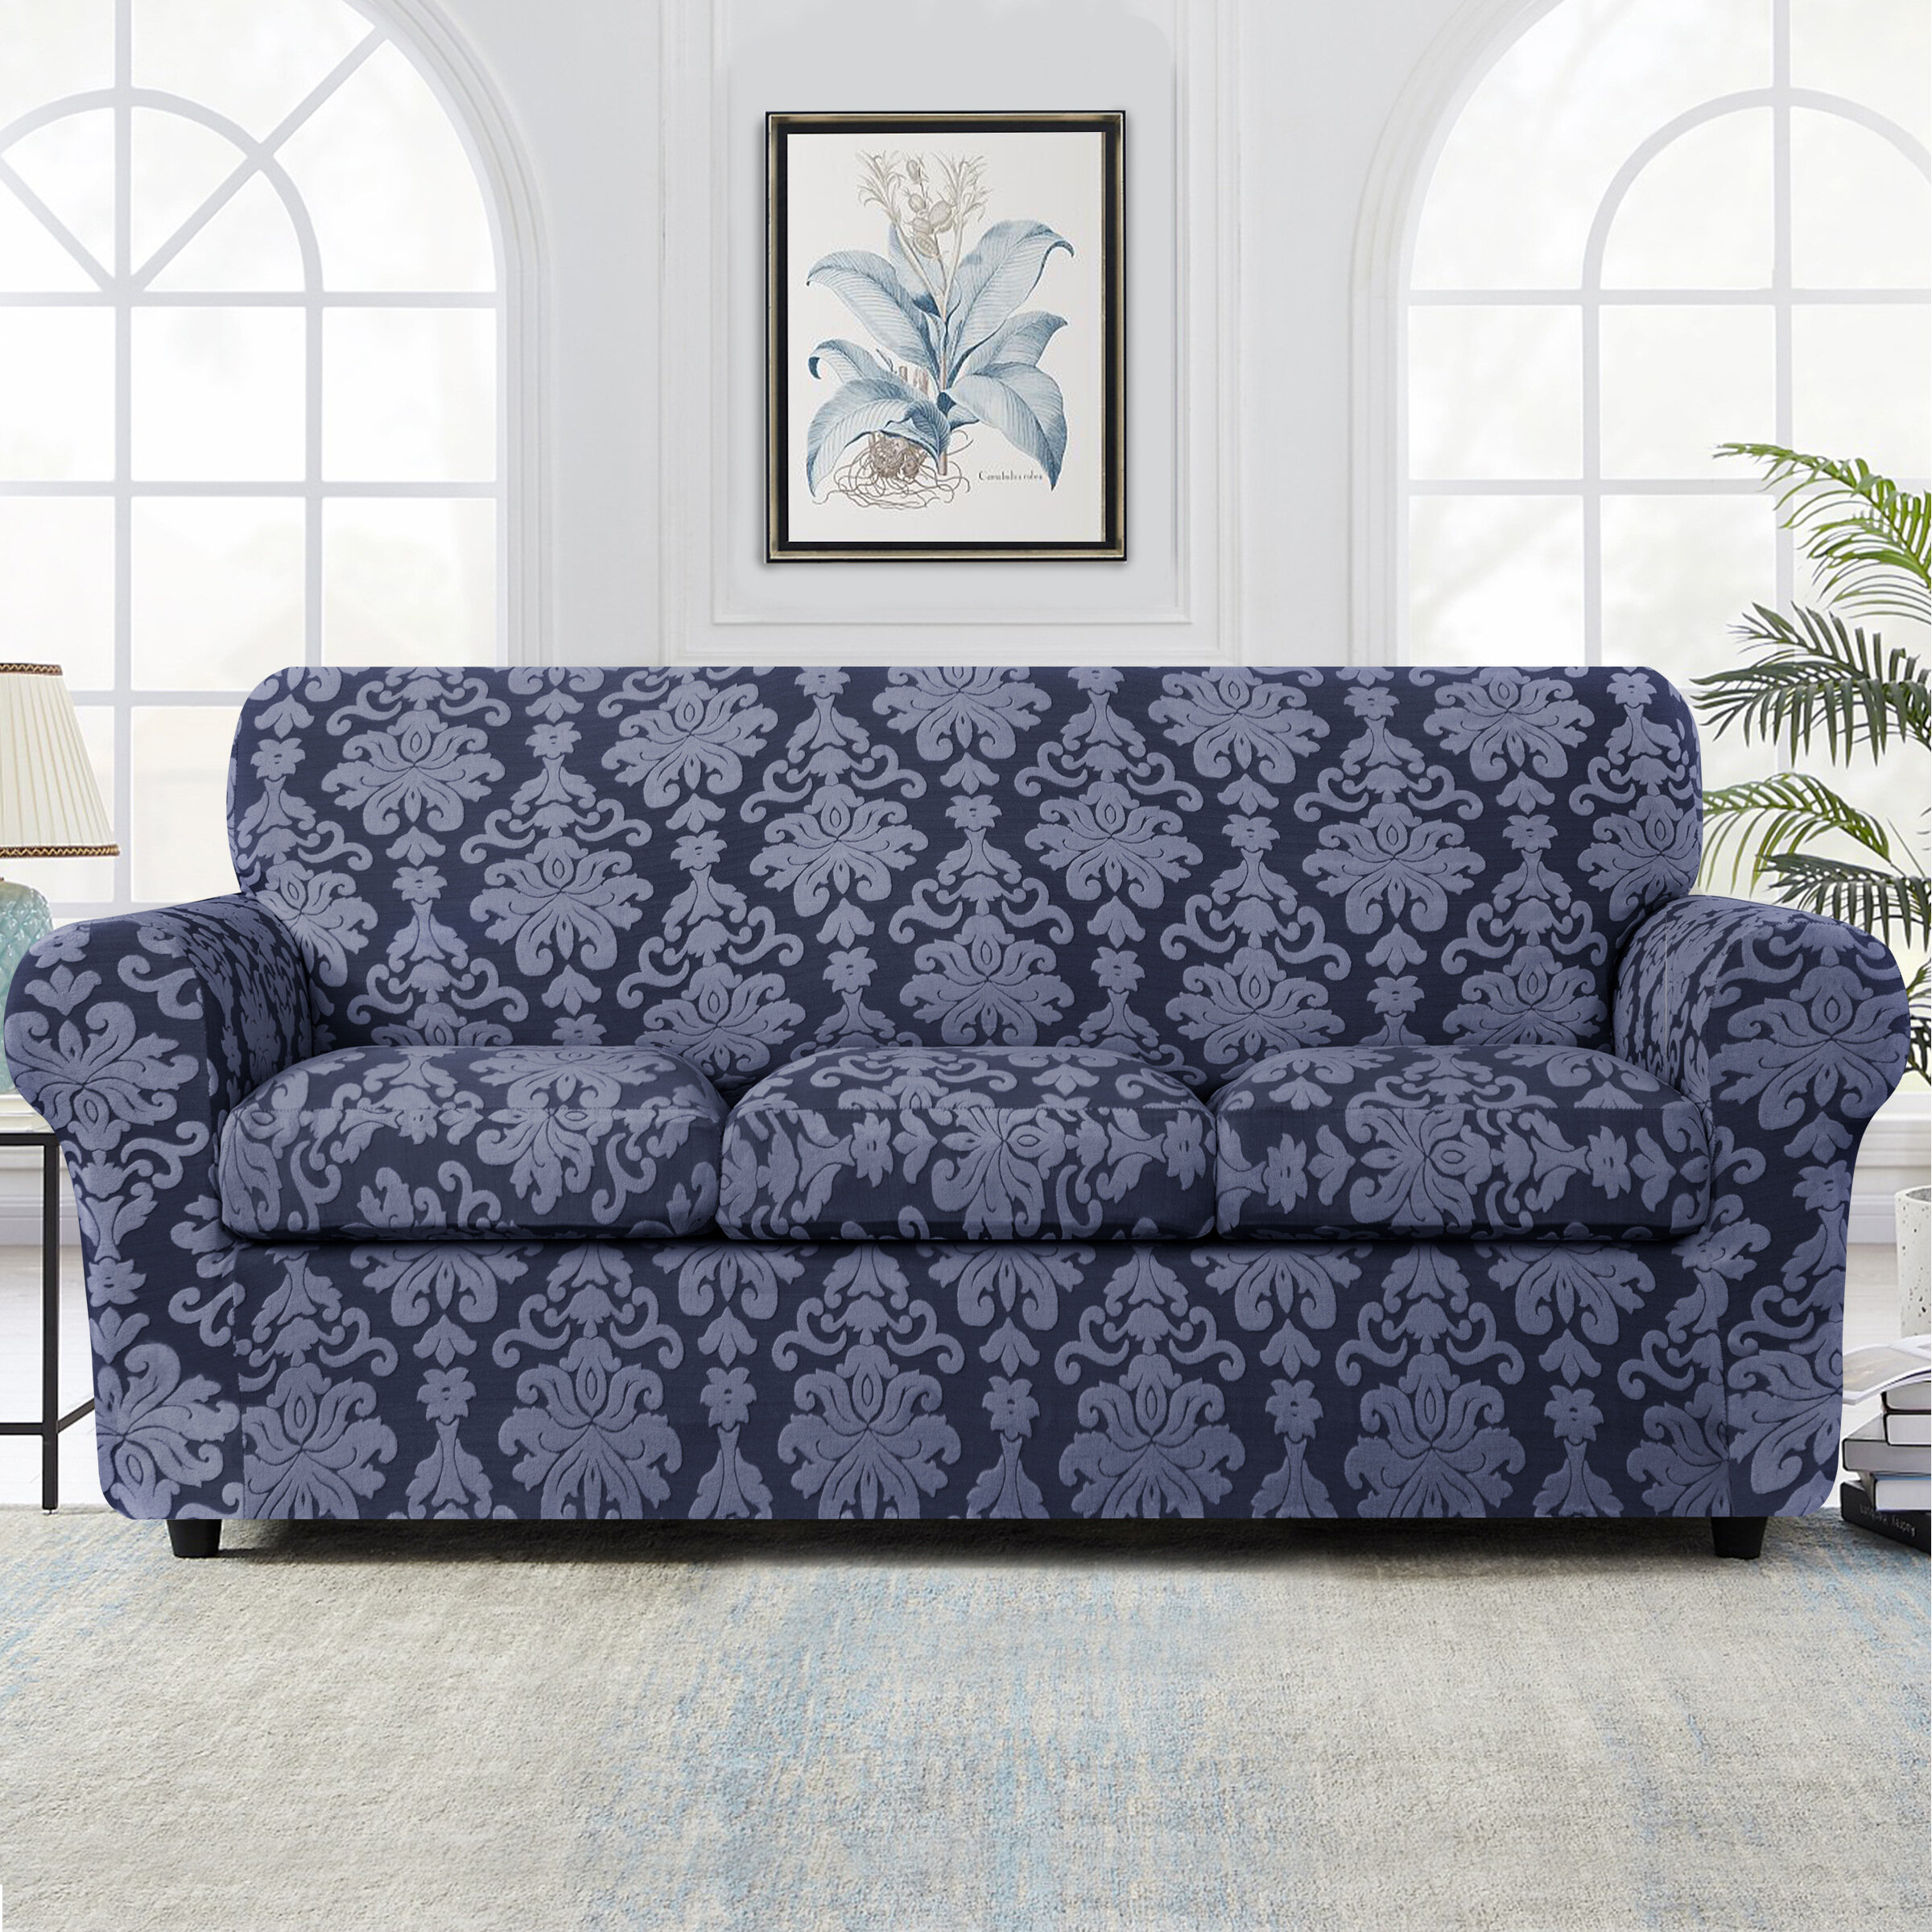 CHUN YI 1 Piece Damask Sofa Cover Stretch Jacquard Couch Covers for Furniture Protector Sofa, Grayish Blue 